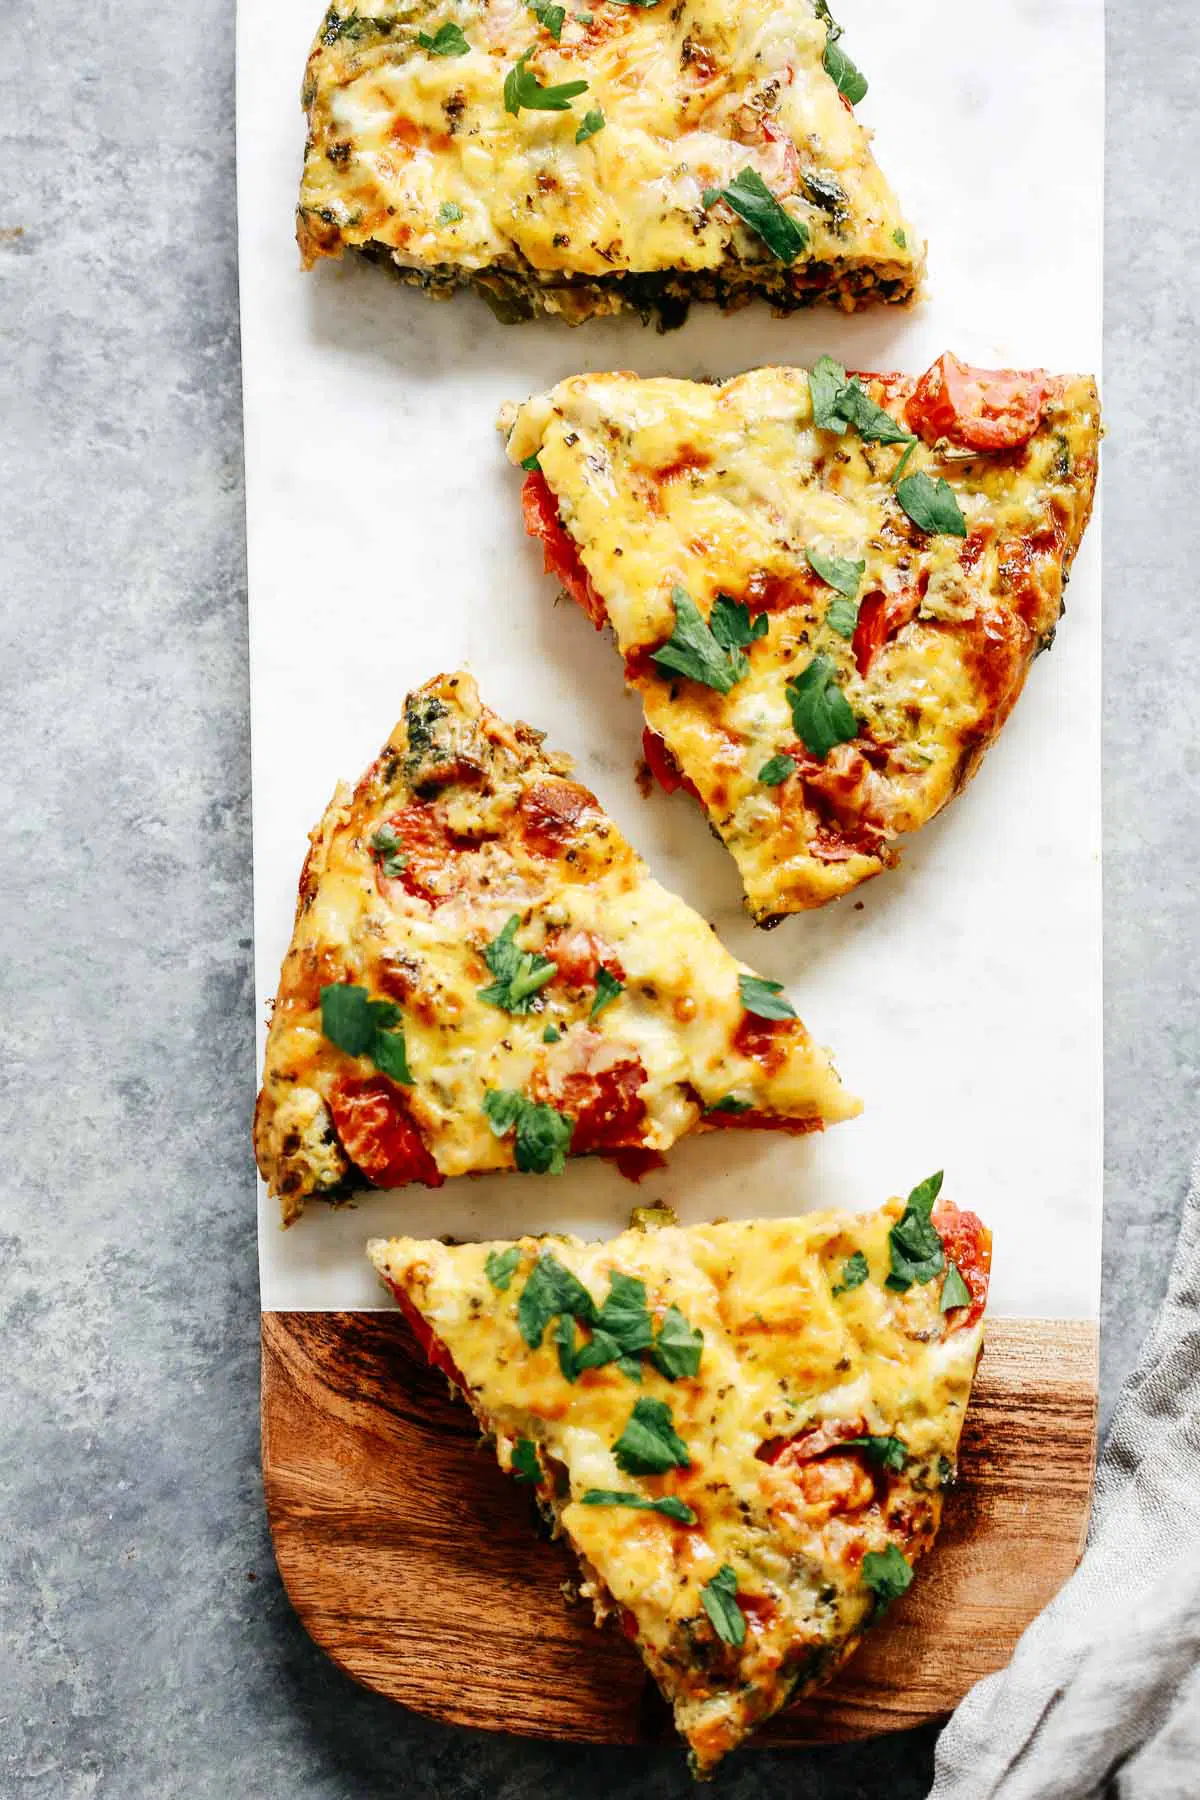 Slices of egg frittata with cherry tomatoes, kale and asparagus